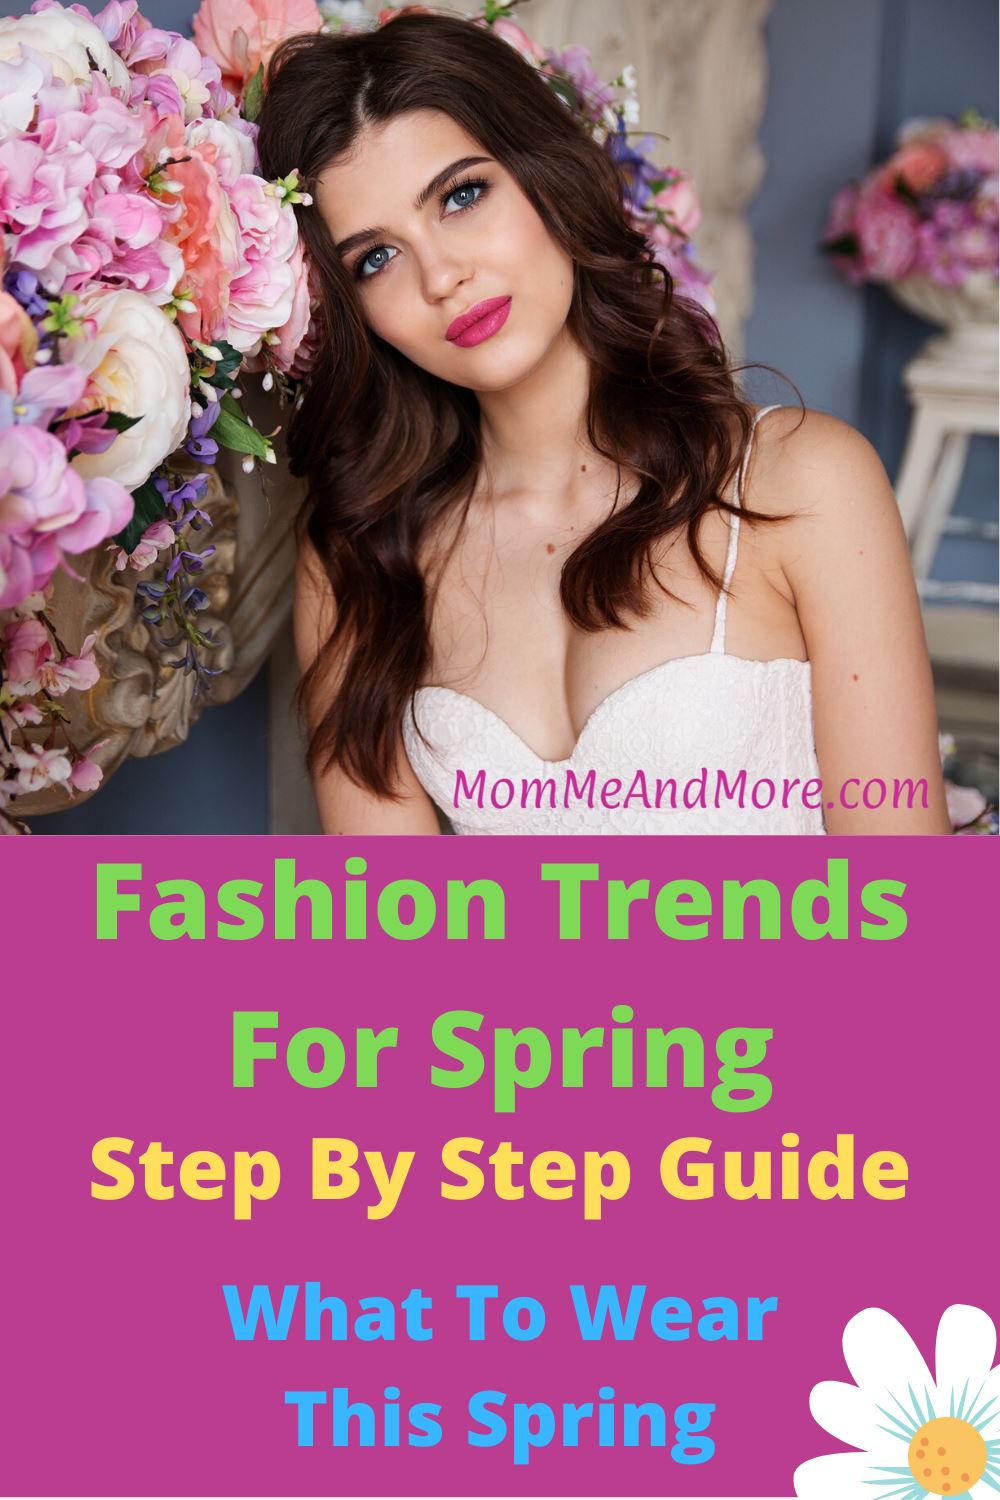 Fashion Trends For Spring | What To Wear This Spring